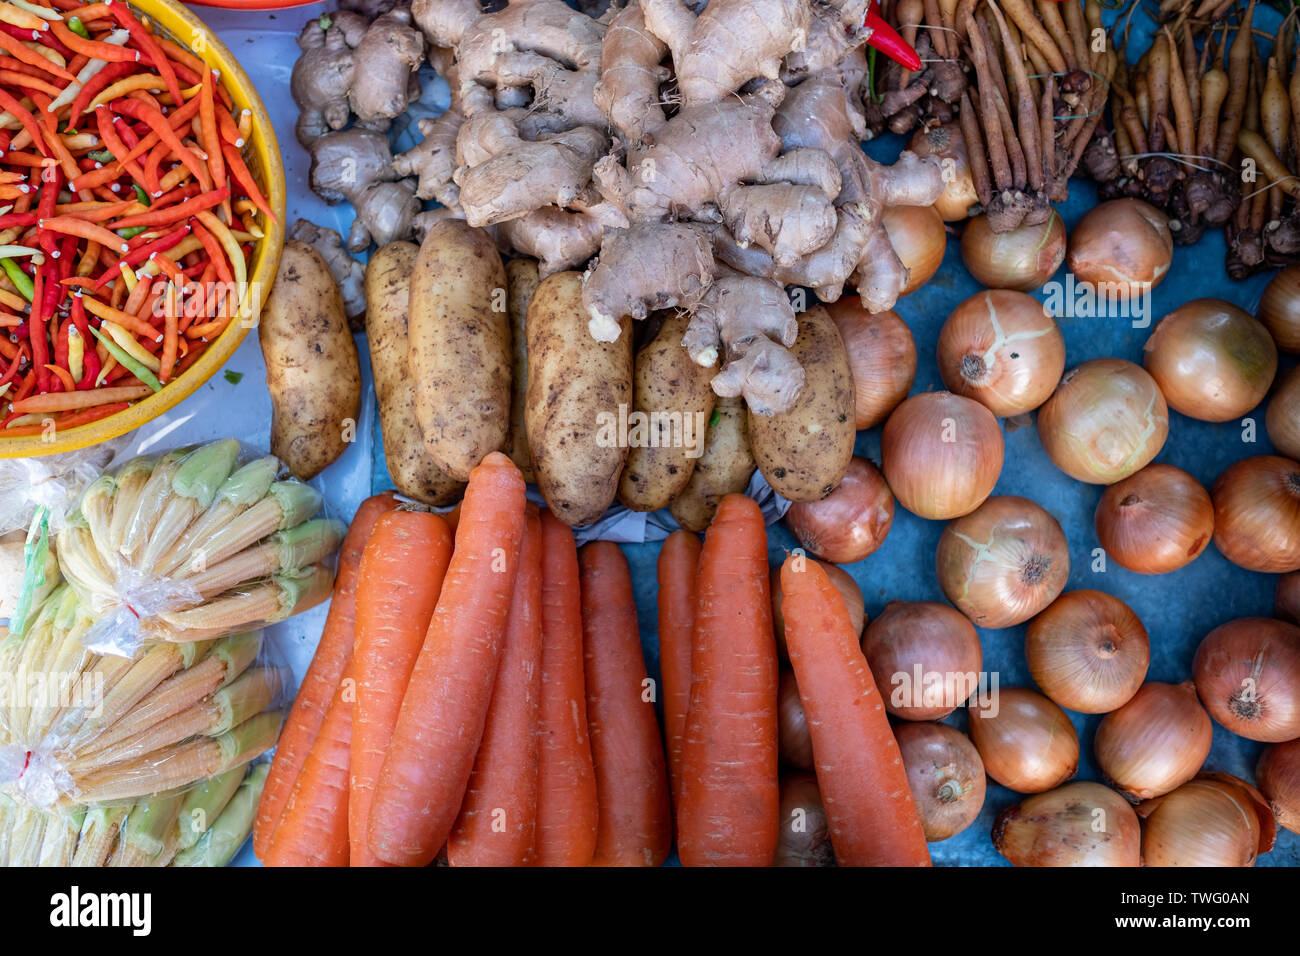 Overhead view of onion, carrot, potato, ginger and chili in a market, Thailand Stock Photo